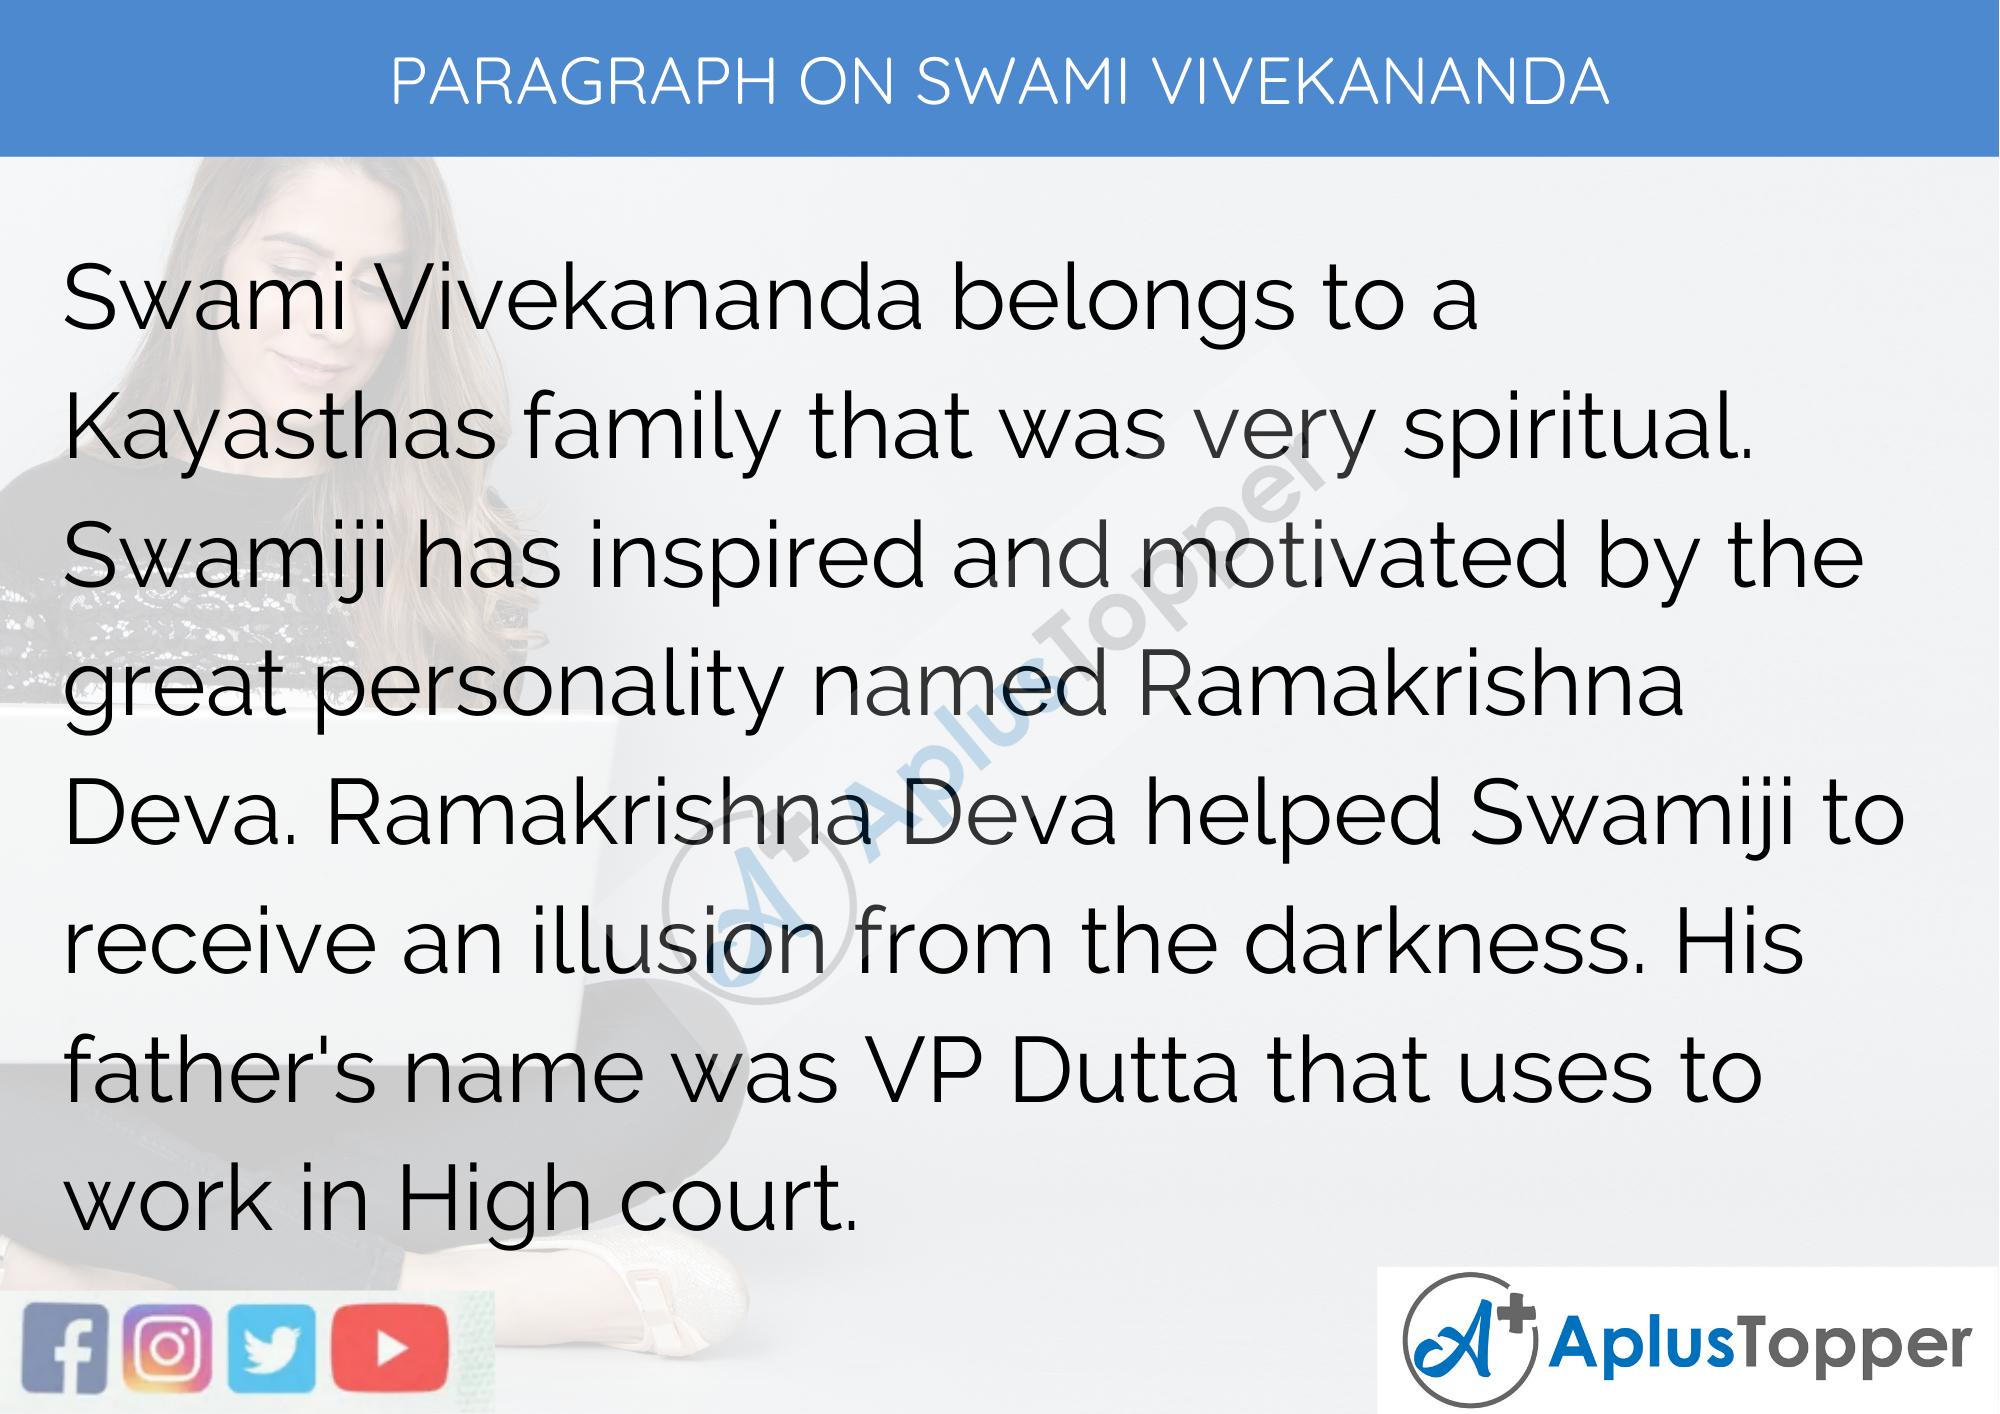 Paragraph on Swami Vivekananda - 250 Words for Classes 9, 10, 11, 12 and Competitive Exam Students